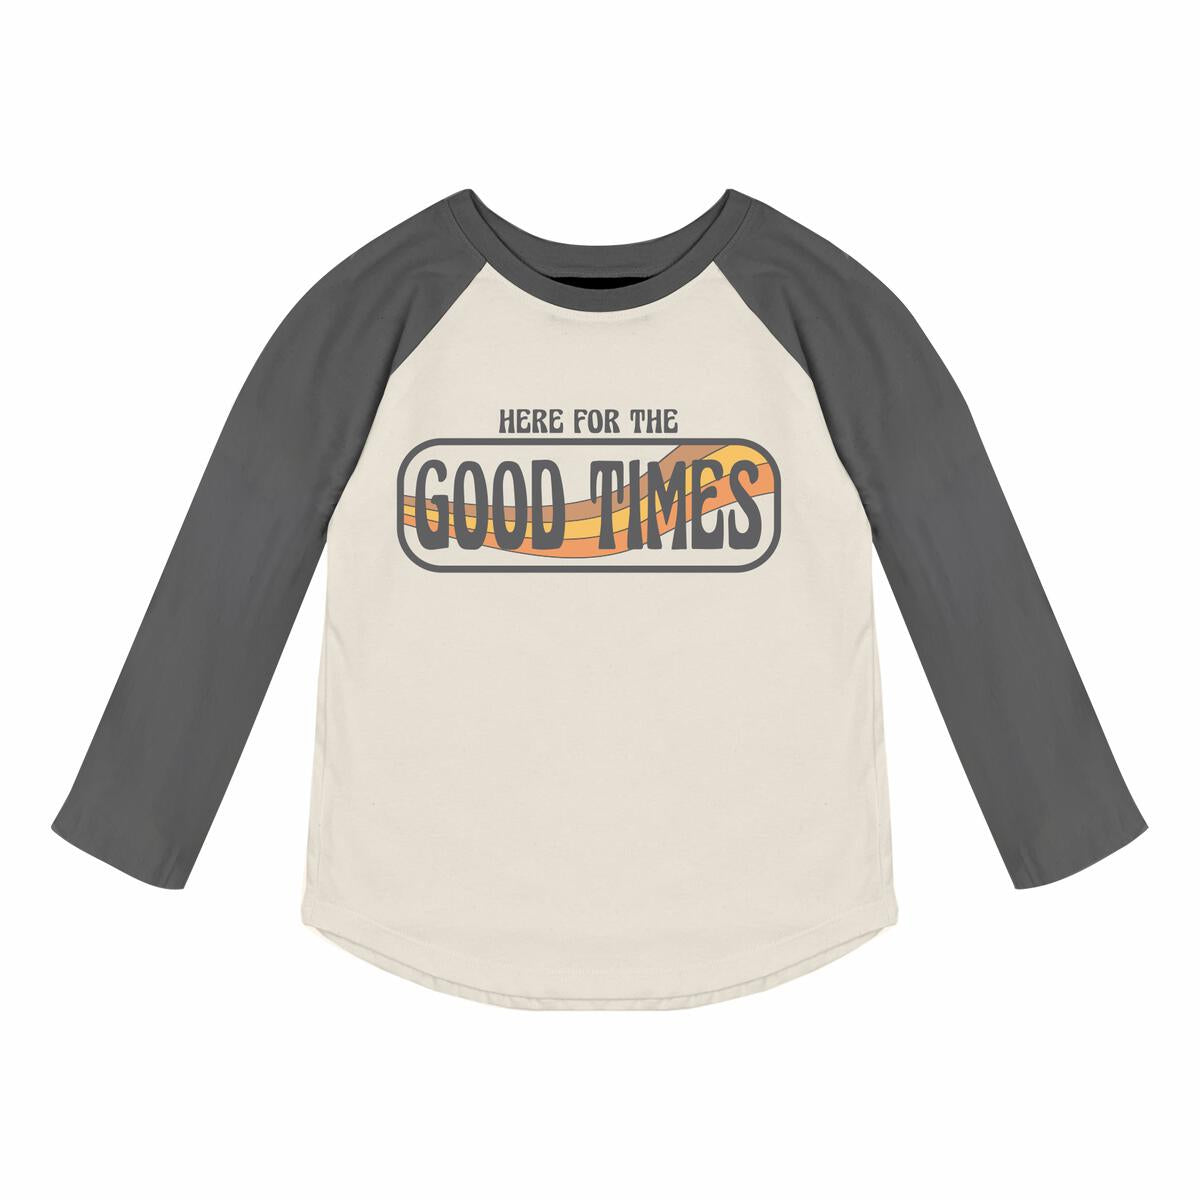 Tiny Whales Good Times Raglan Long Sleeve T-Shirt - Twinkle Twinkle Little One